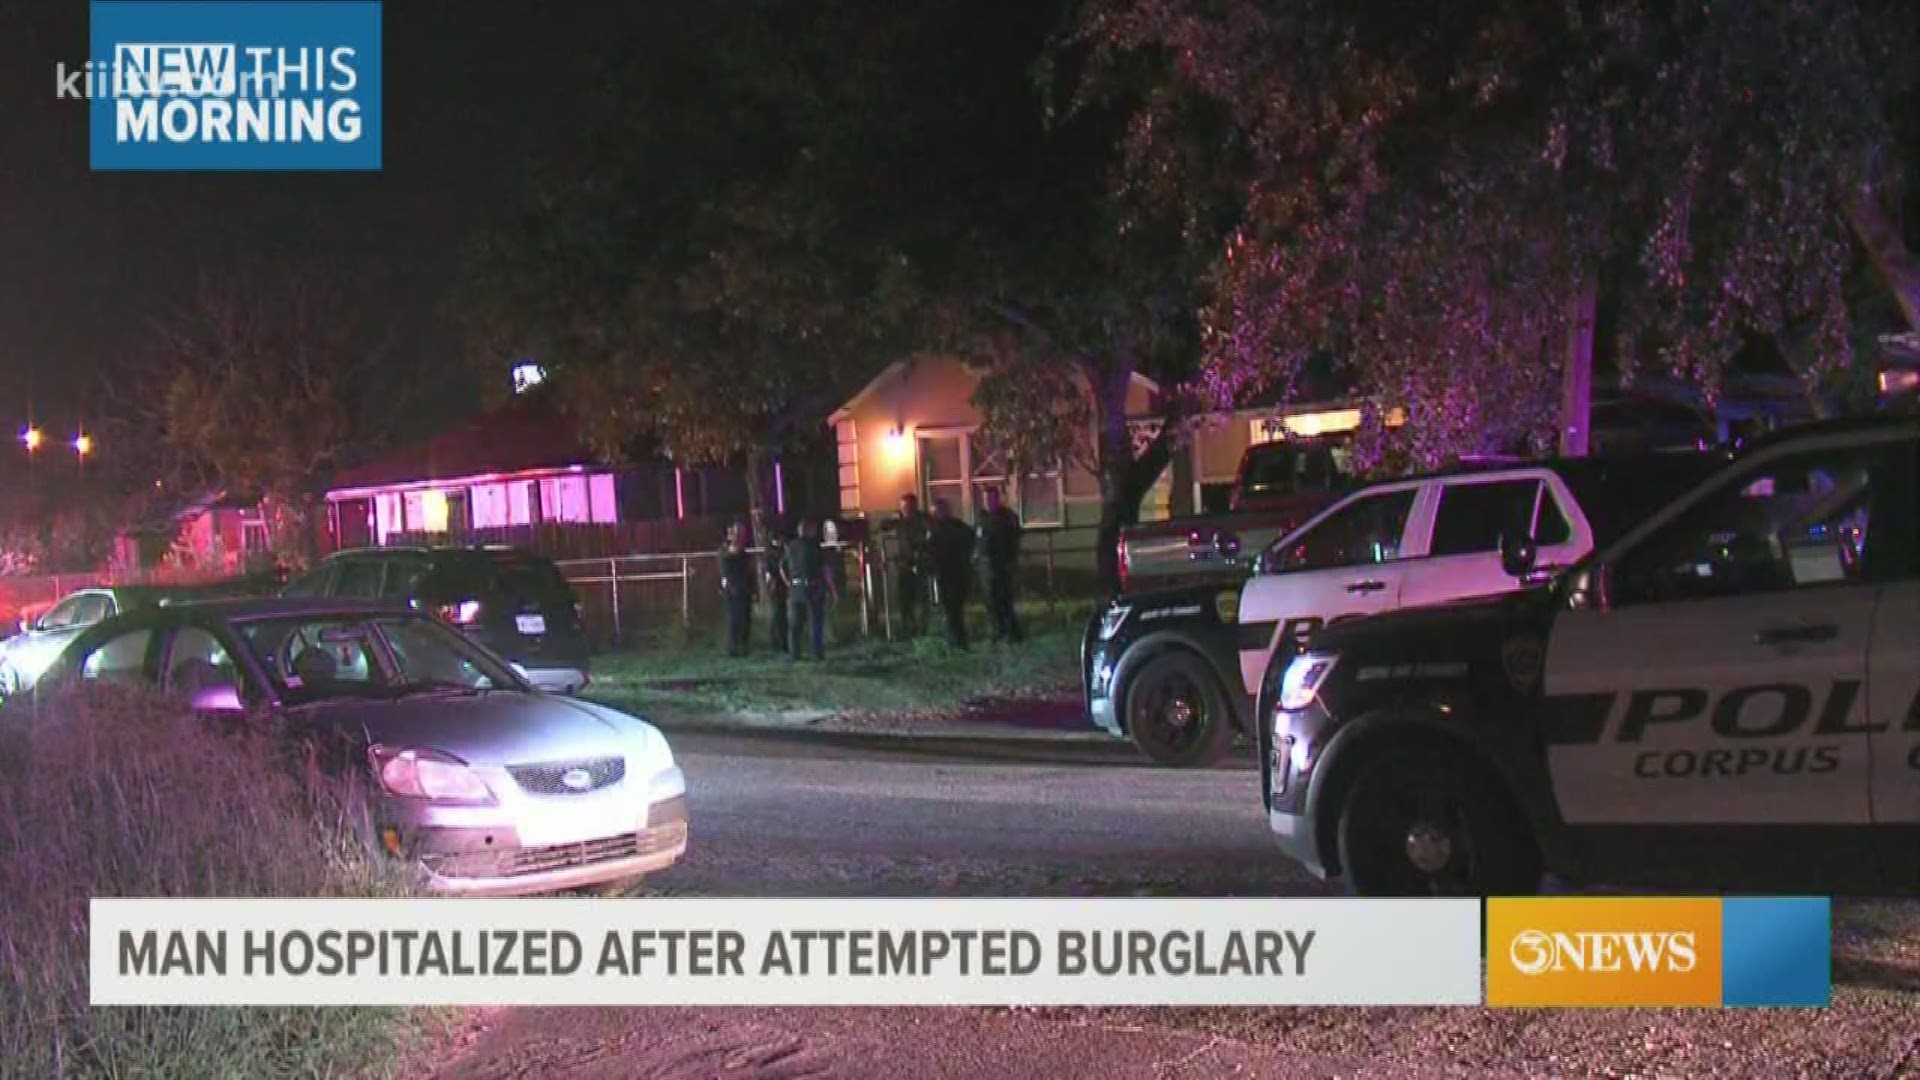 The suspect was taken to a hospital after sustaining injuries while attempting to burglarize the home.